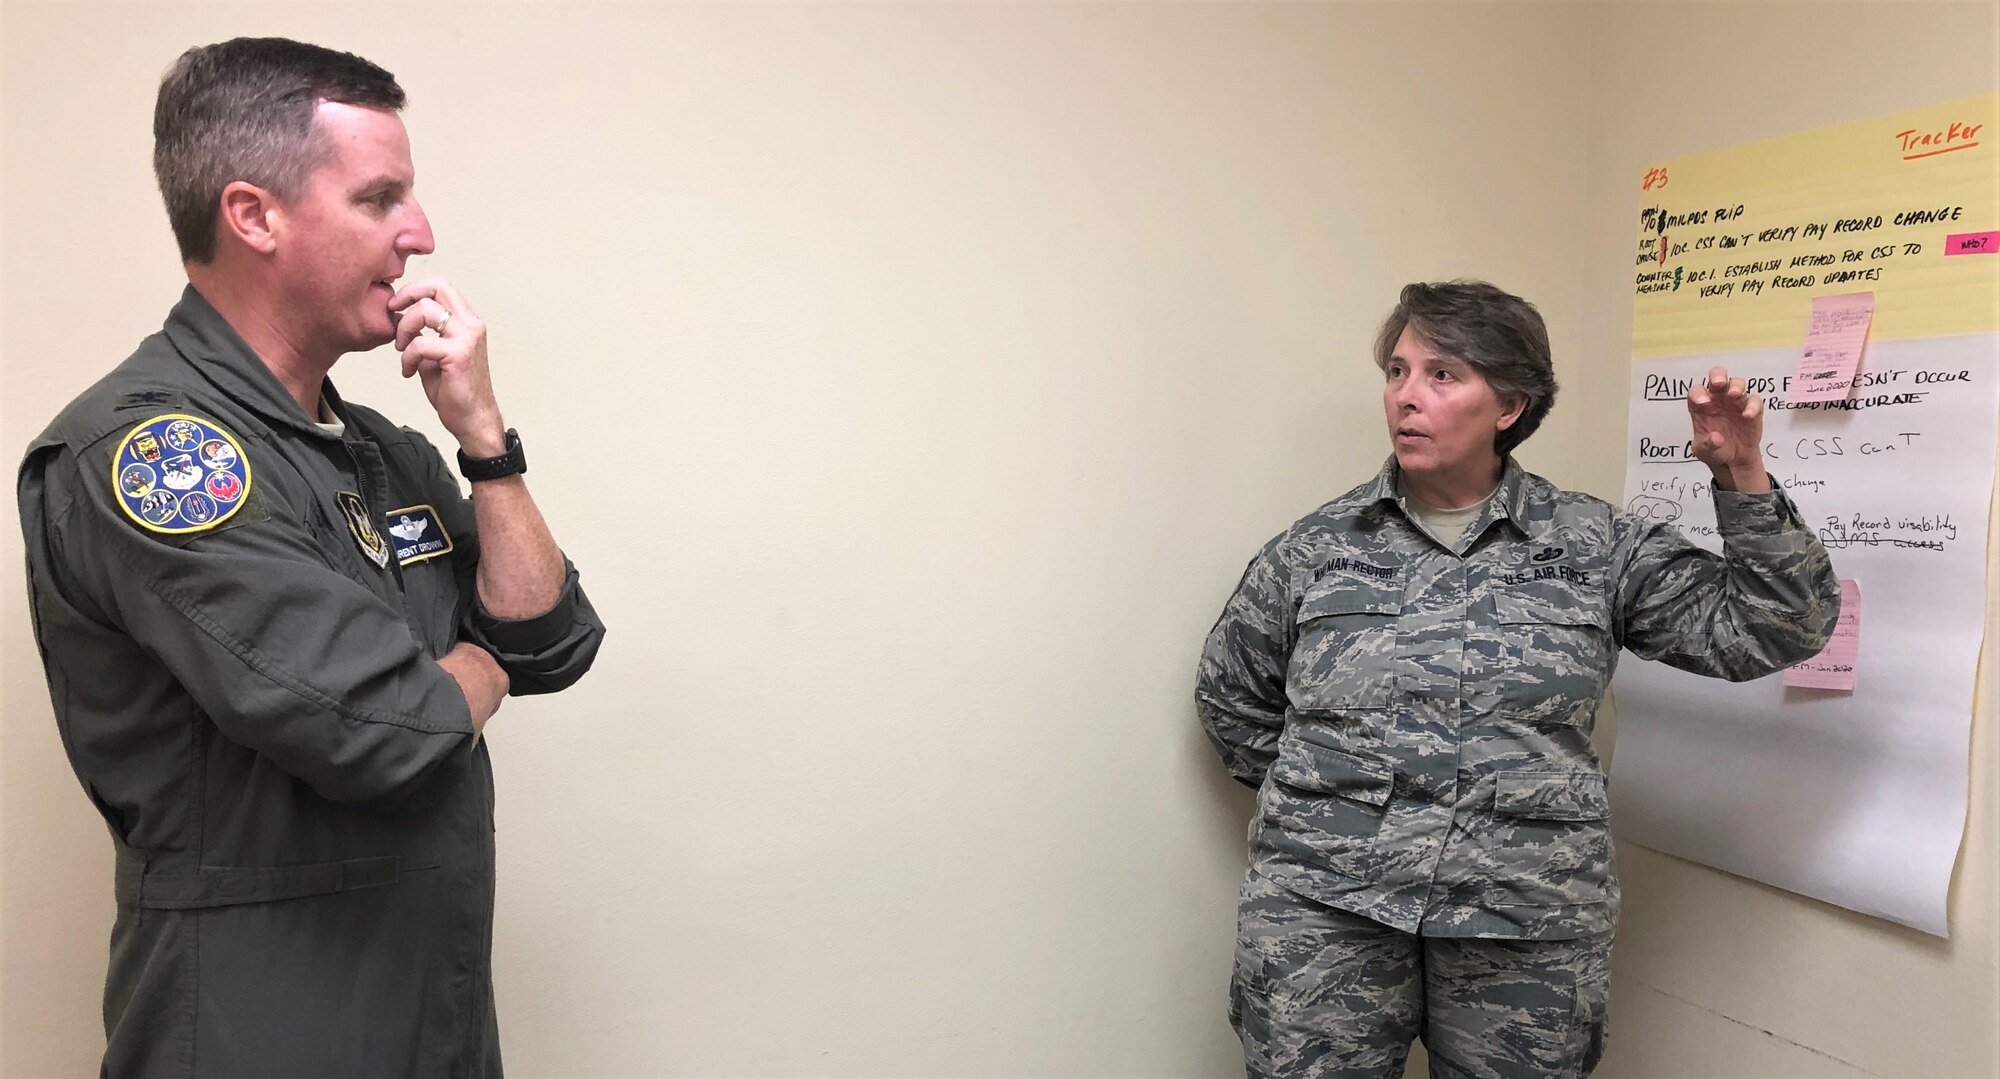 Senior Master Sgt. Amy Whitman-Rector, 340th Flying Training Group financial management superintendent, briefs Col. Brent Drown, 340th Flying Training Group deputy commander on counter measures her group devised to address pay issues that occur when Reserve members transition between pay statuses. Drown stood in for the improvement process champion, 340th FTG Commander Col. Allen Duckworth at the Nov. 19-21 event at Joint Base San Antonio-Randolph, Texas. (U.S. Air Force photo by Janis El Shabazz)